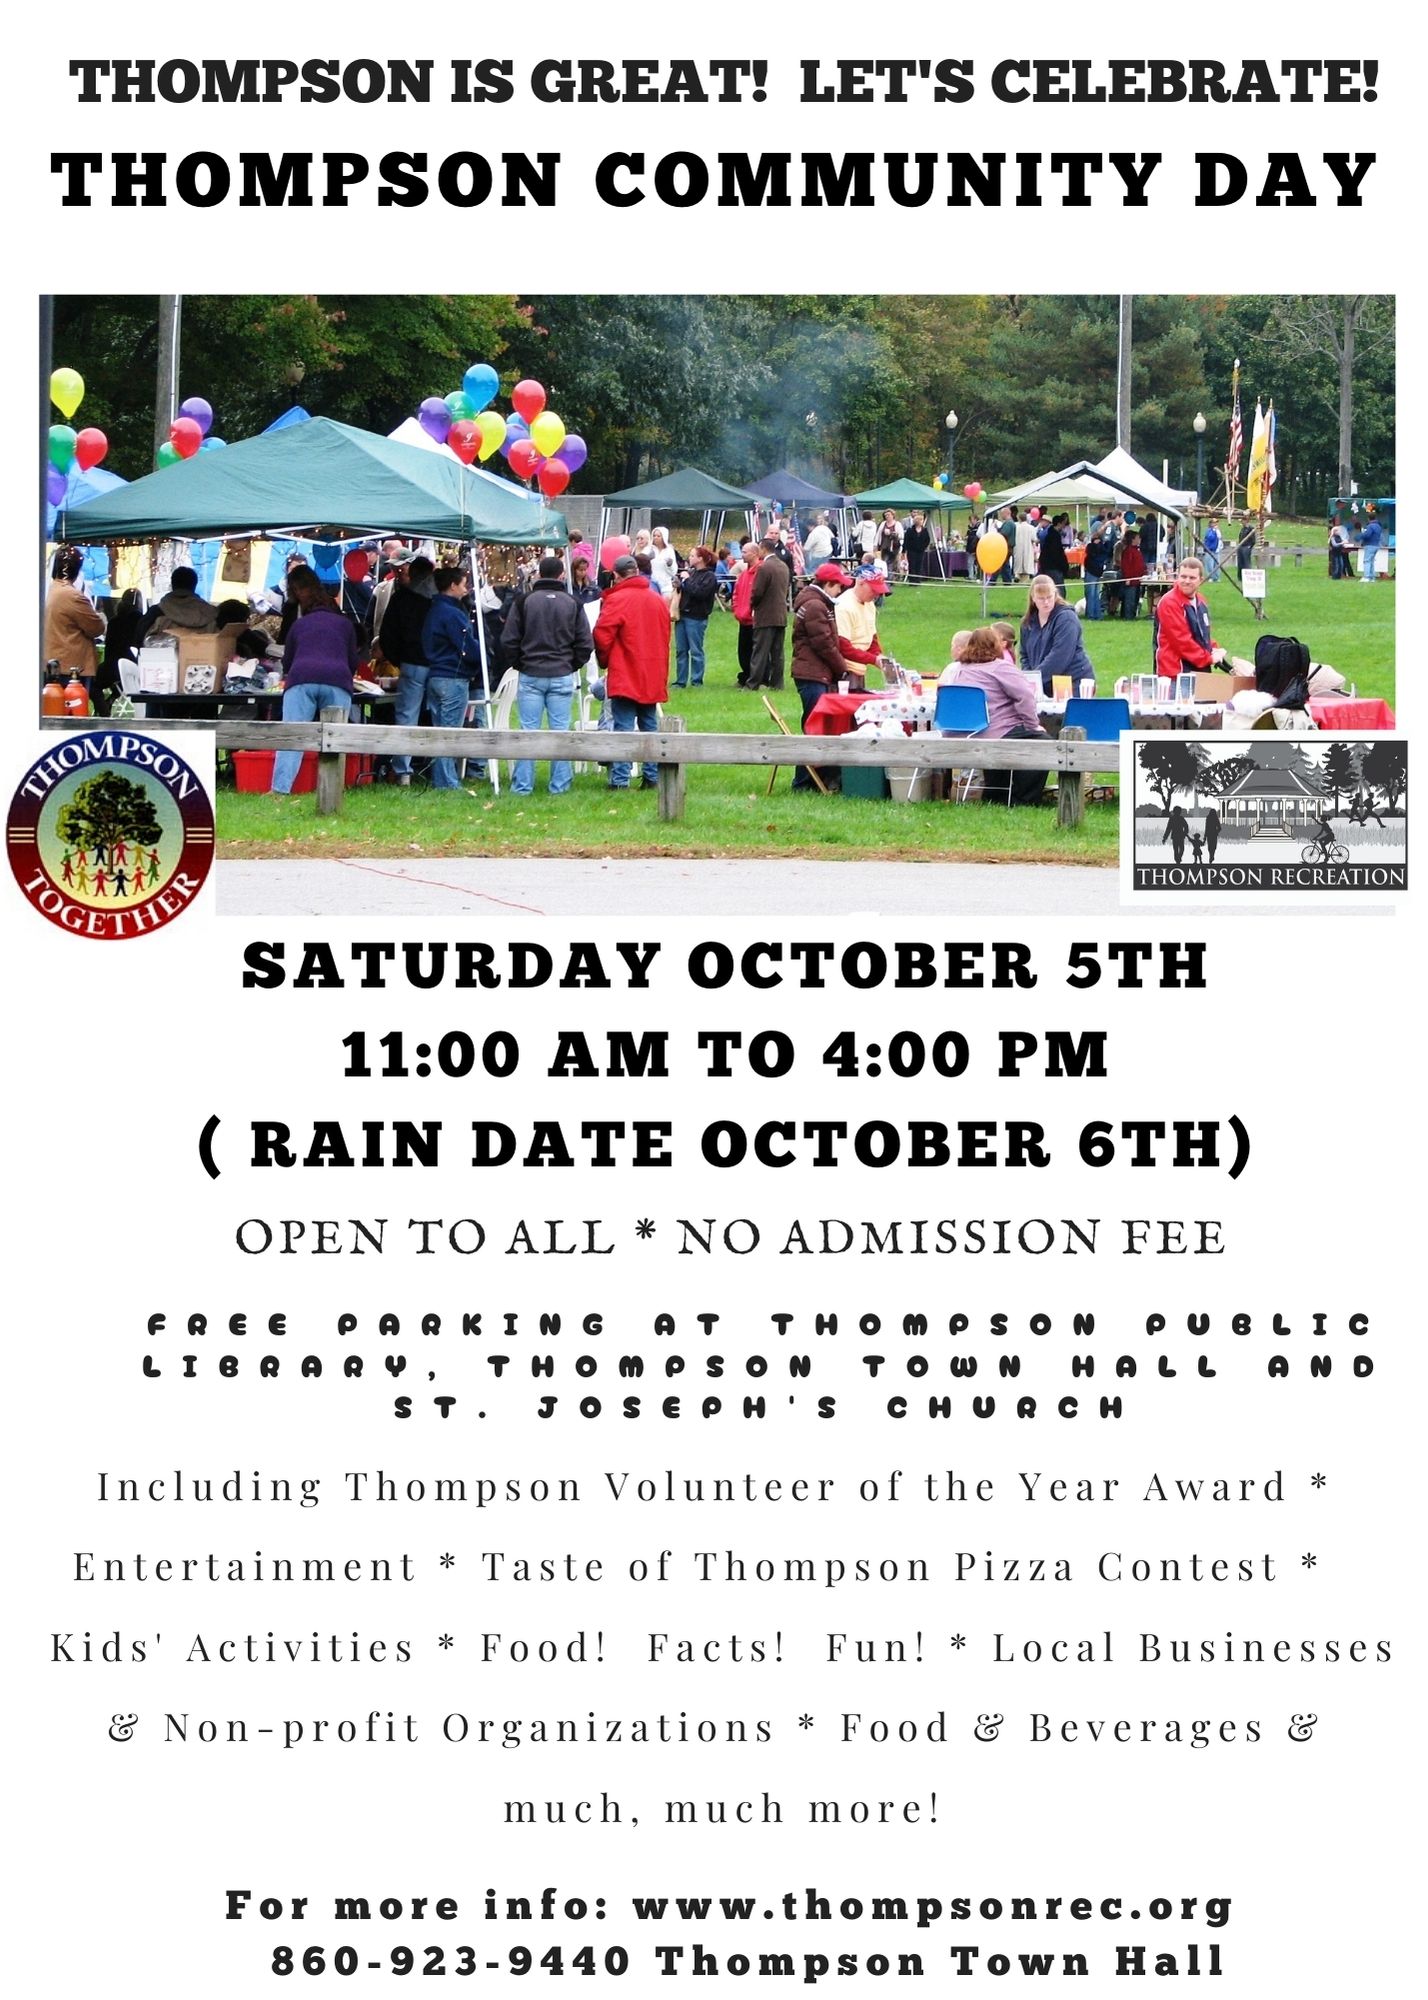 Thompson's 20th Annual Community Day Event